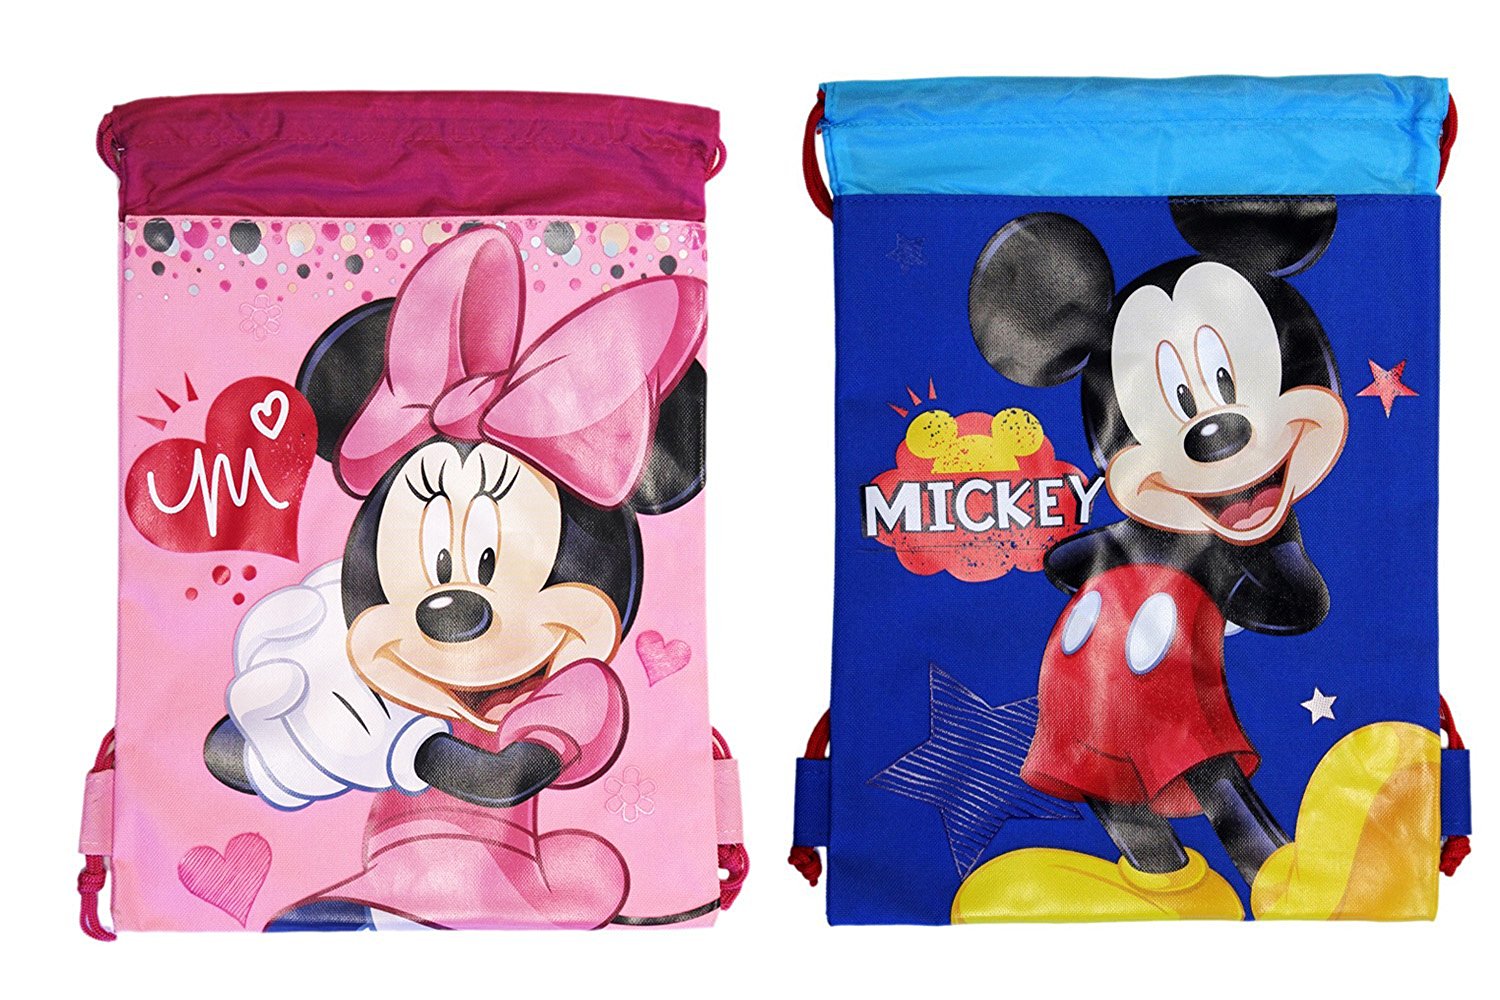 Mickey & Minnie Mouse Drawstring Backpack - Large Drawsting Bags Set Of 2 - image 1 of 3